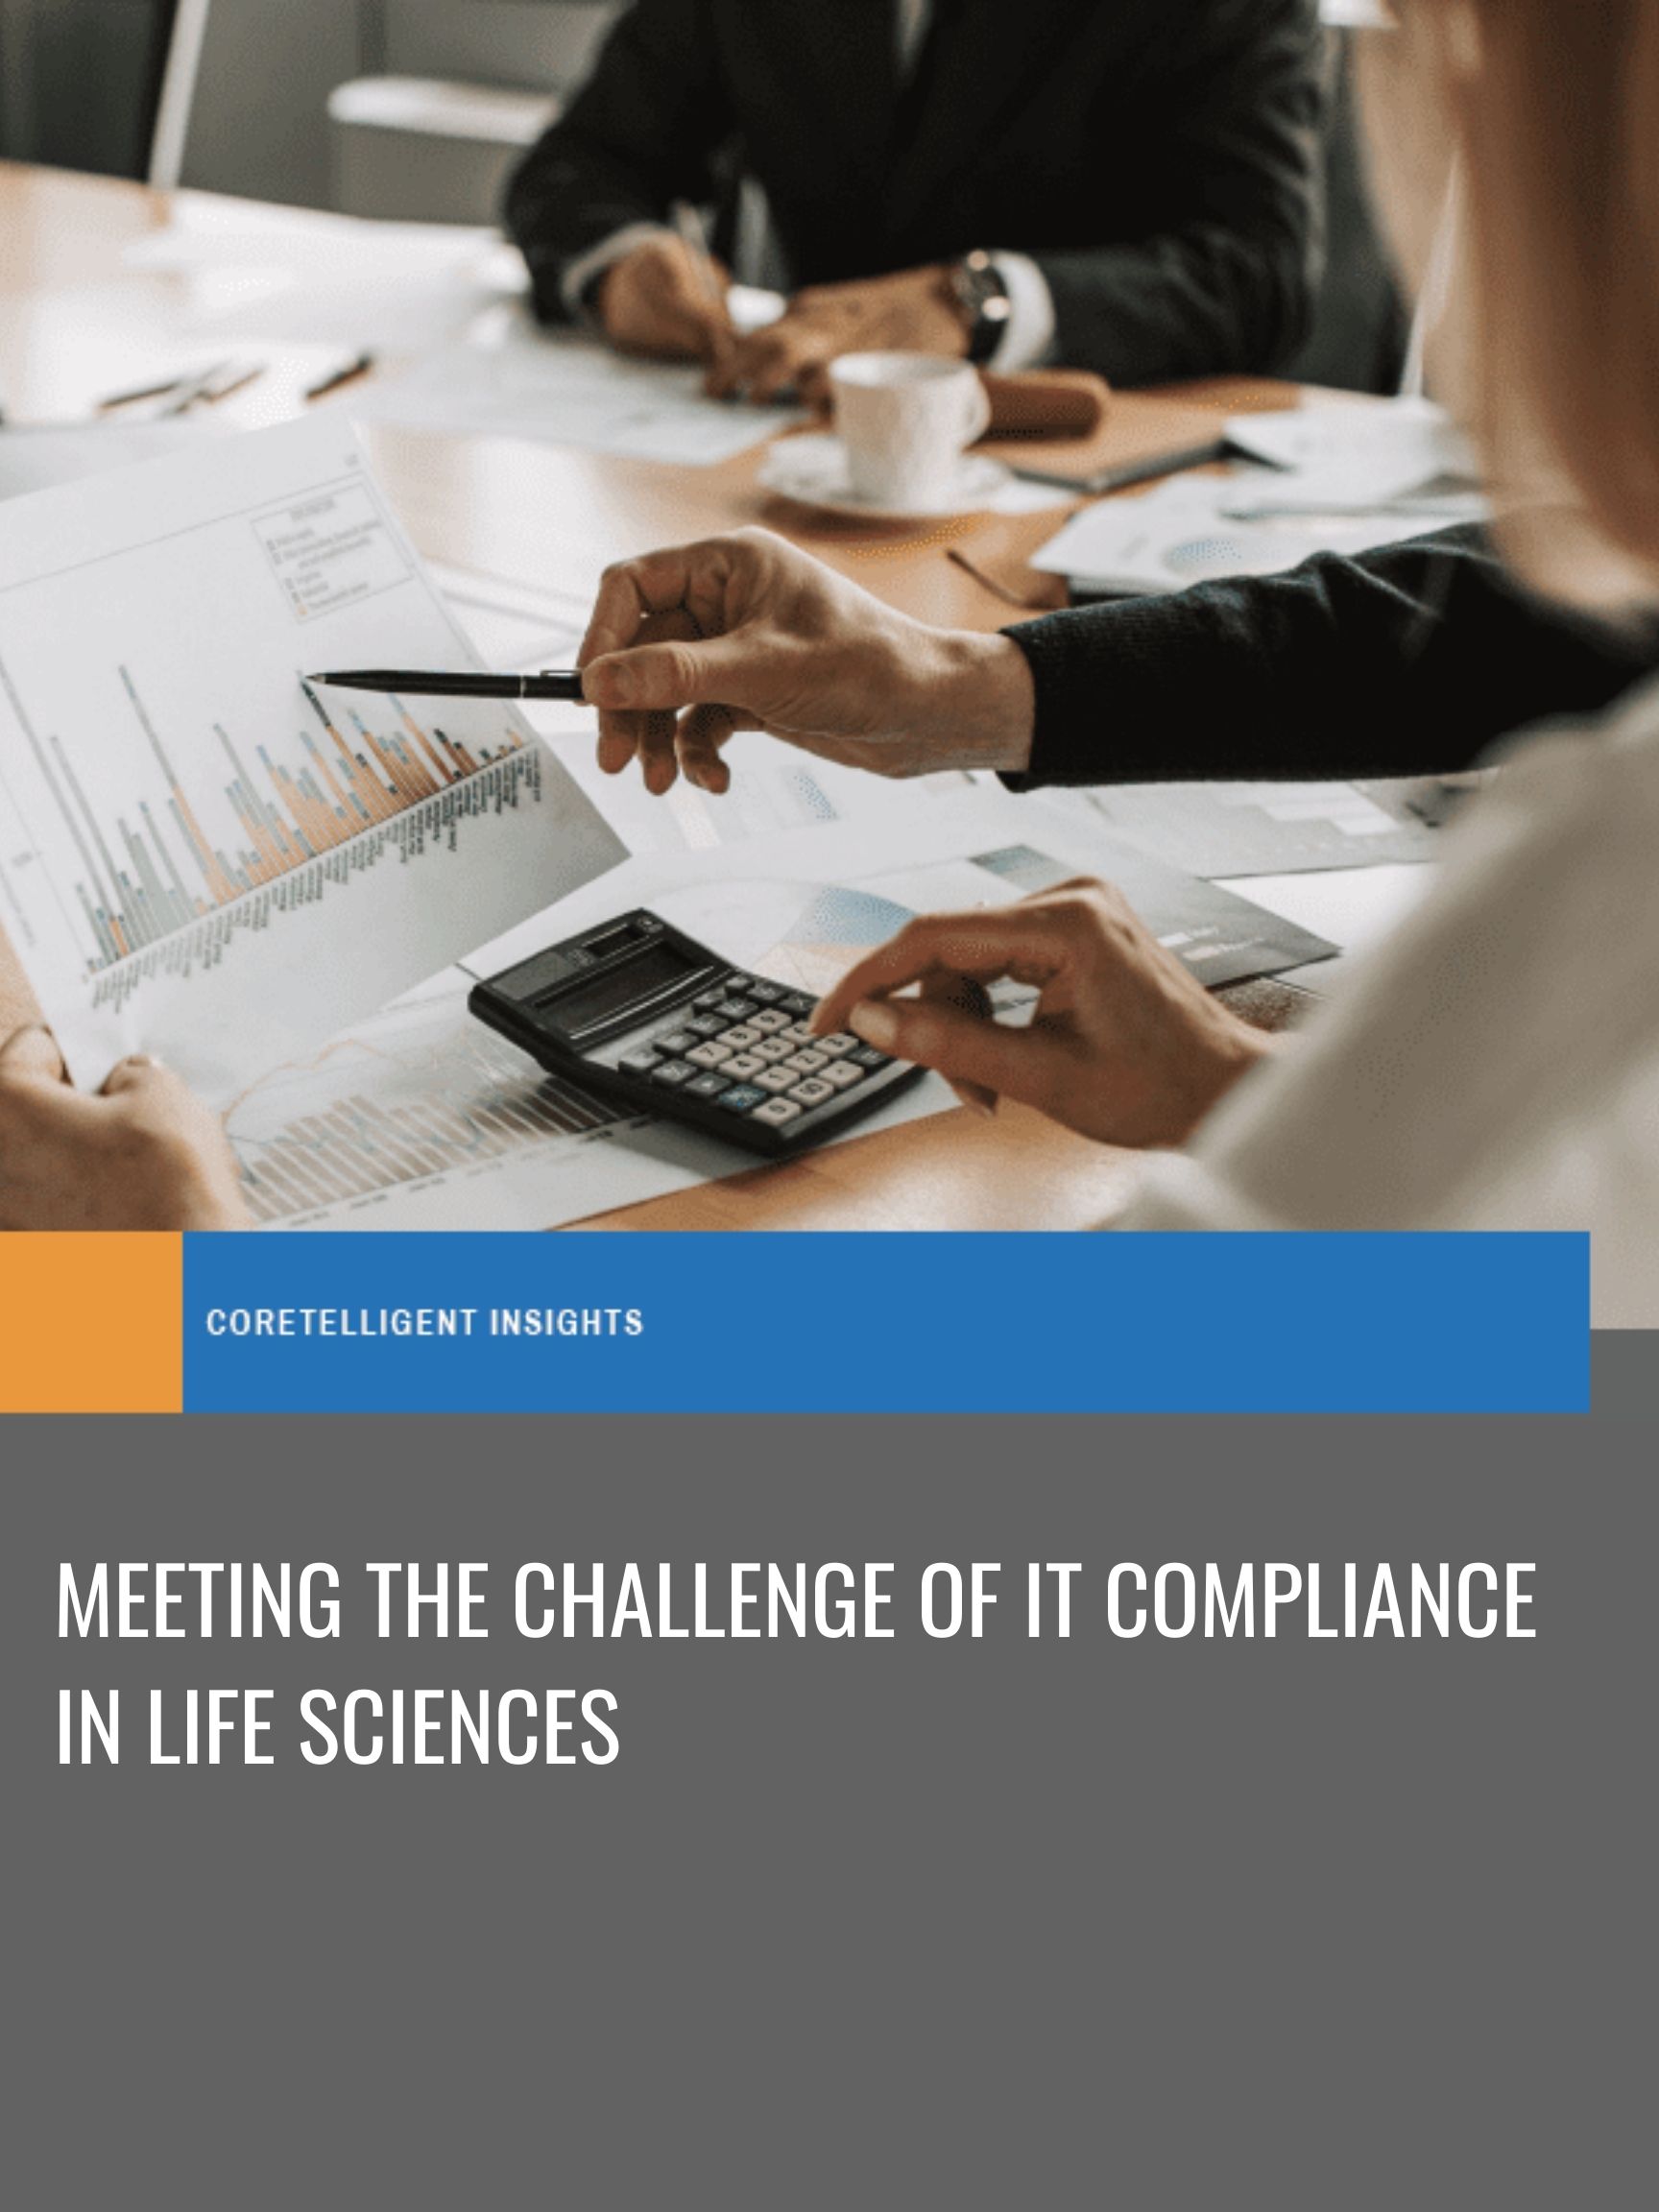 Meeting the Challenge of IT Compliance in Life Sciences